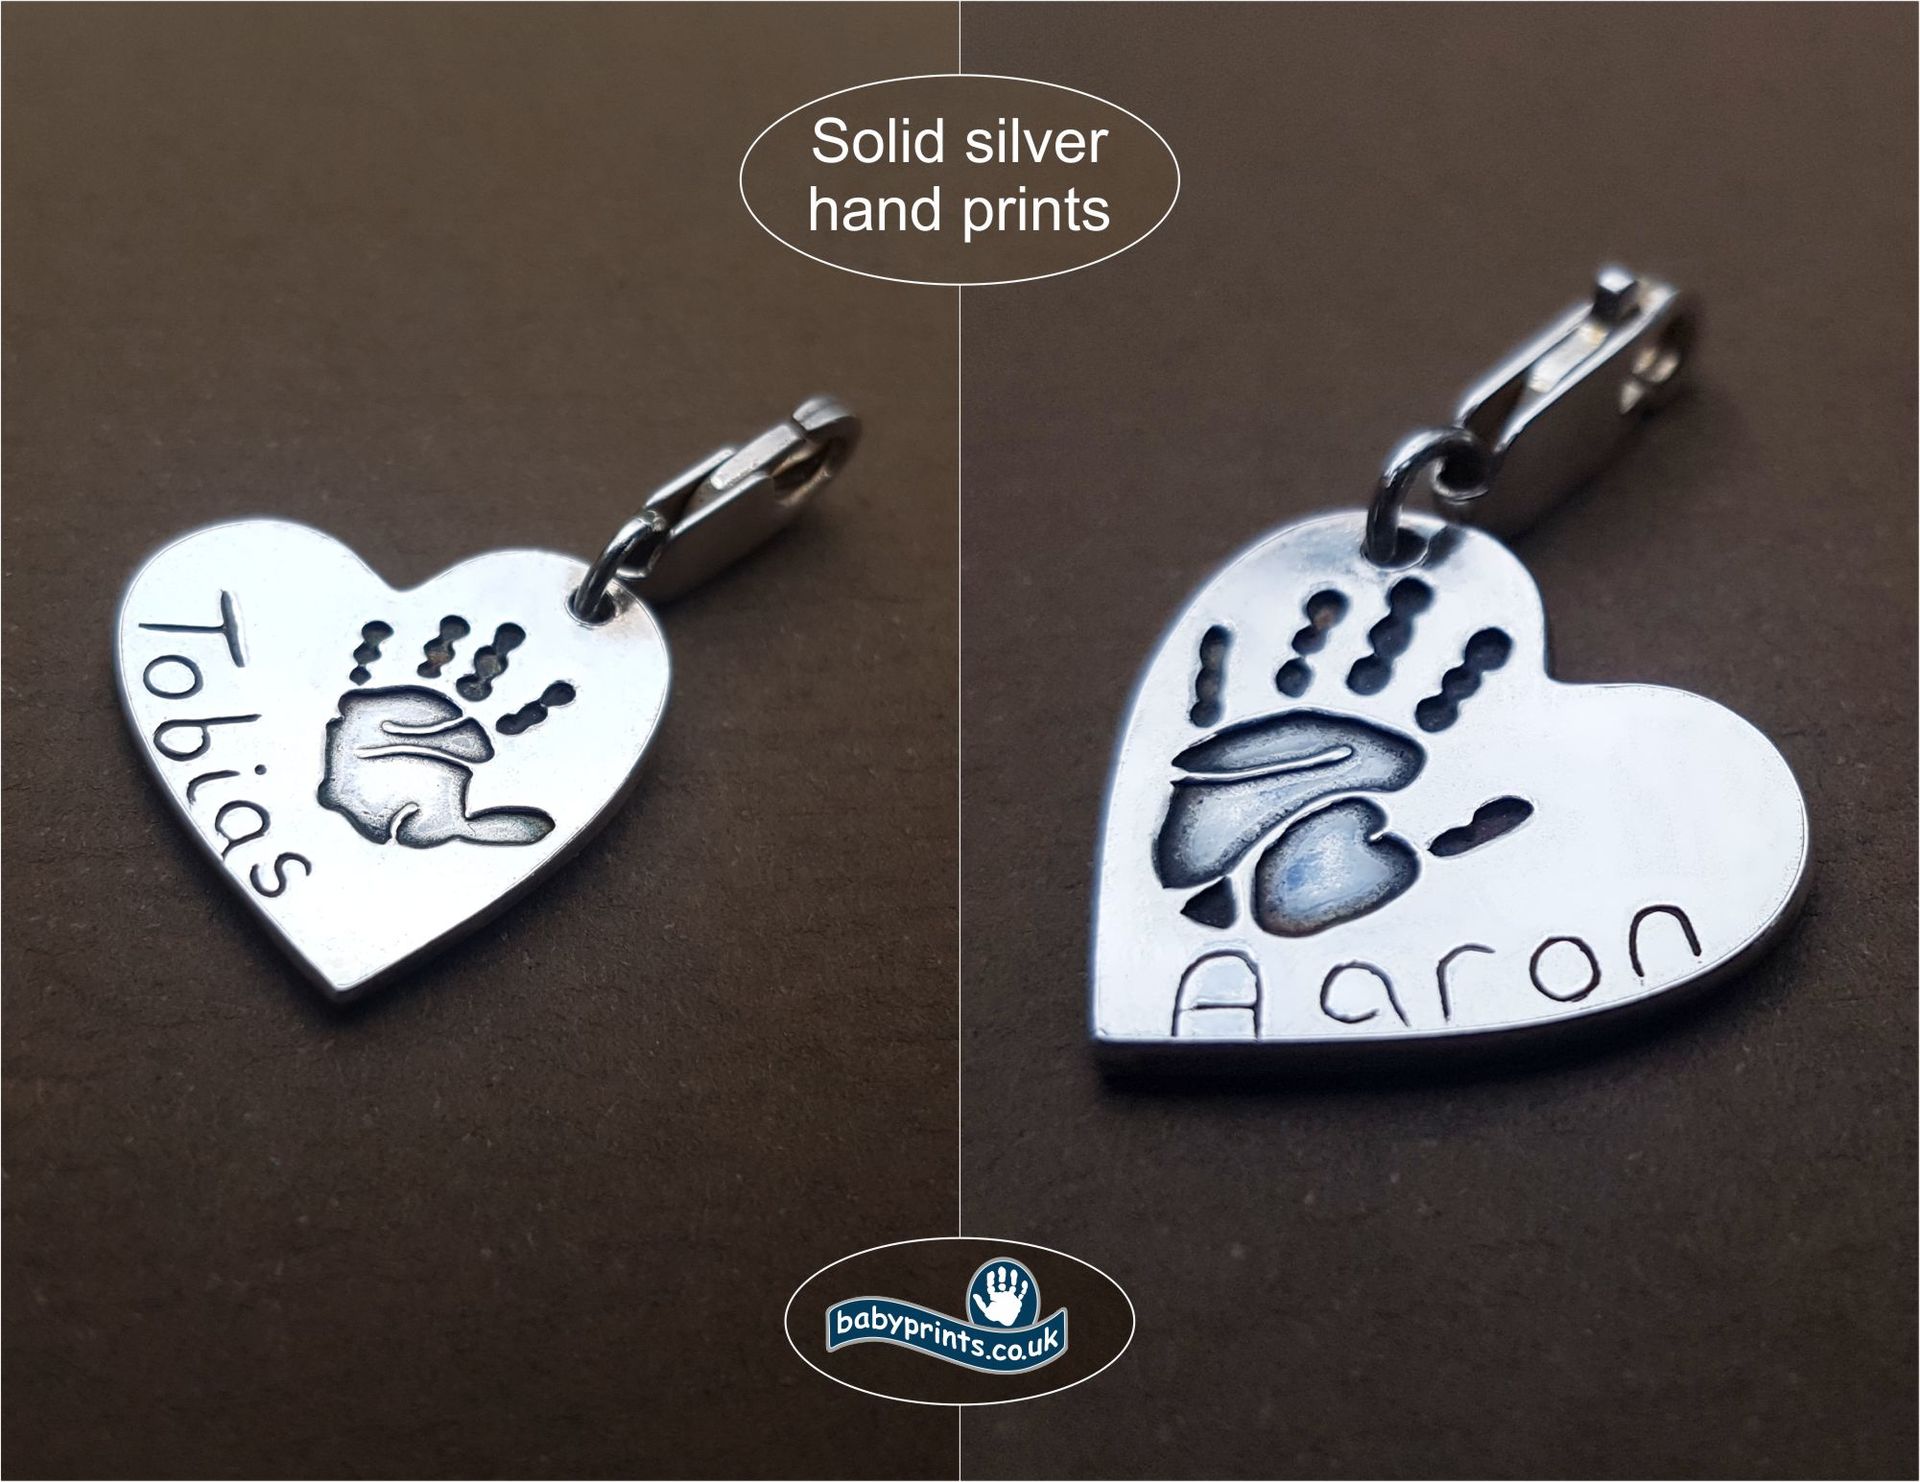 Clasp attachment on solid silver hand print charm